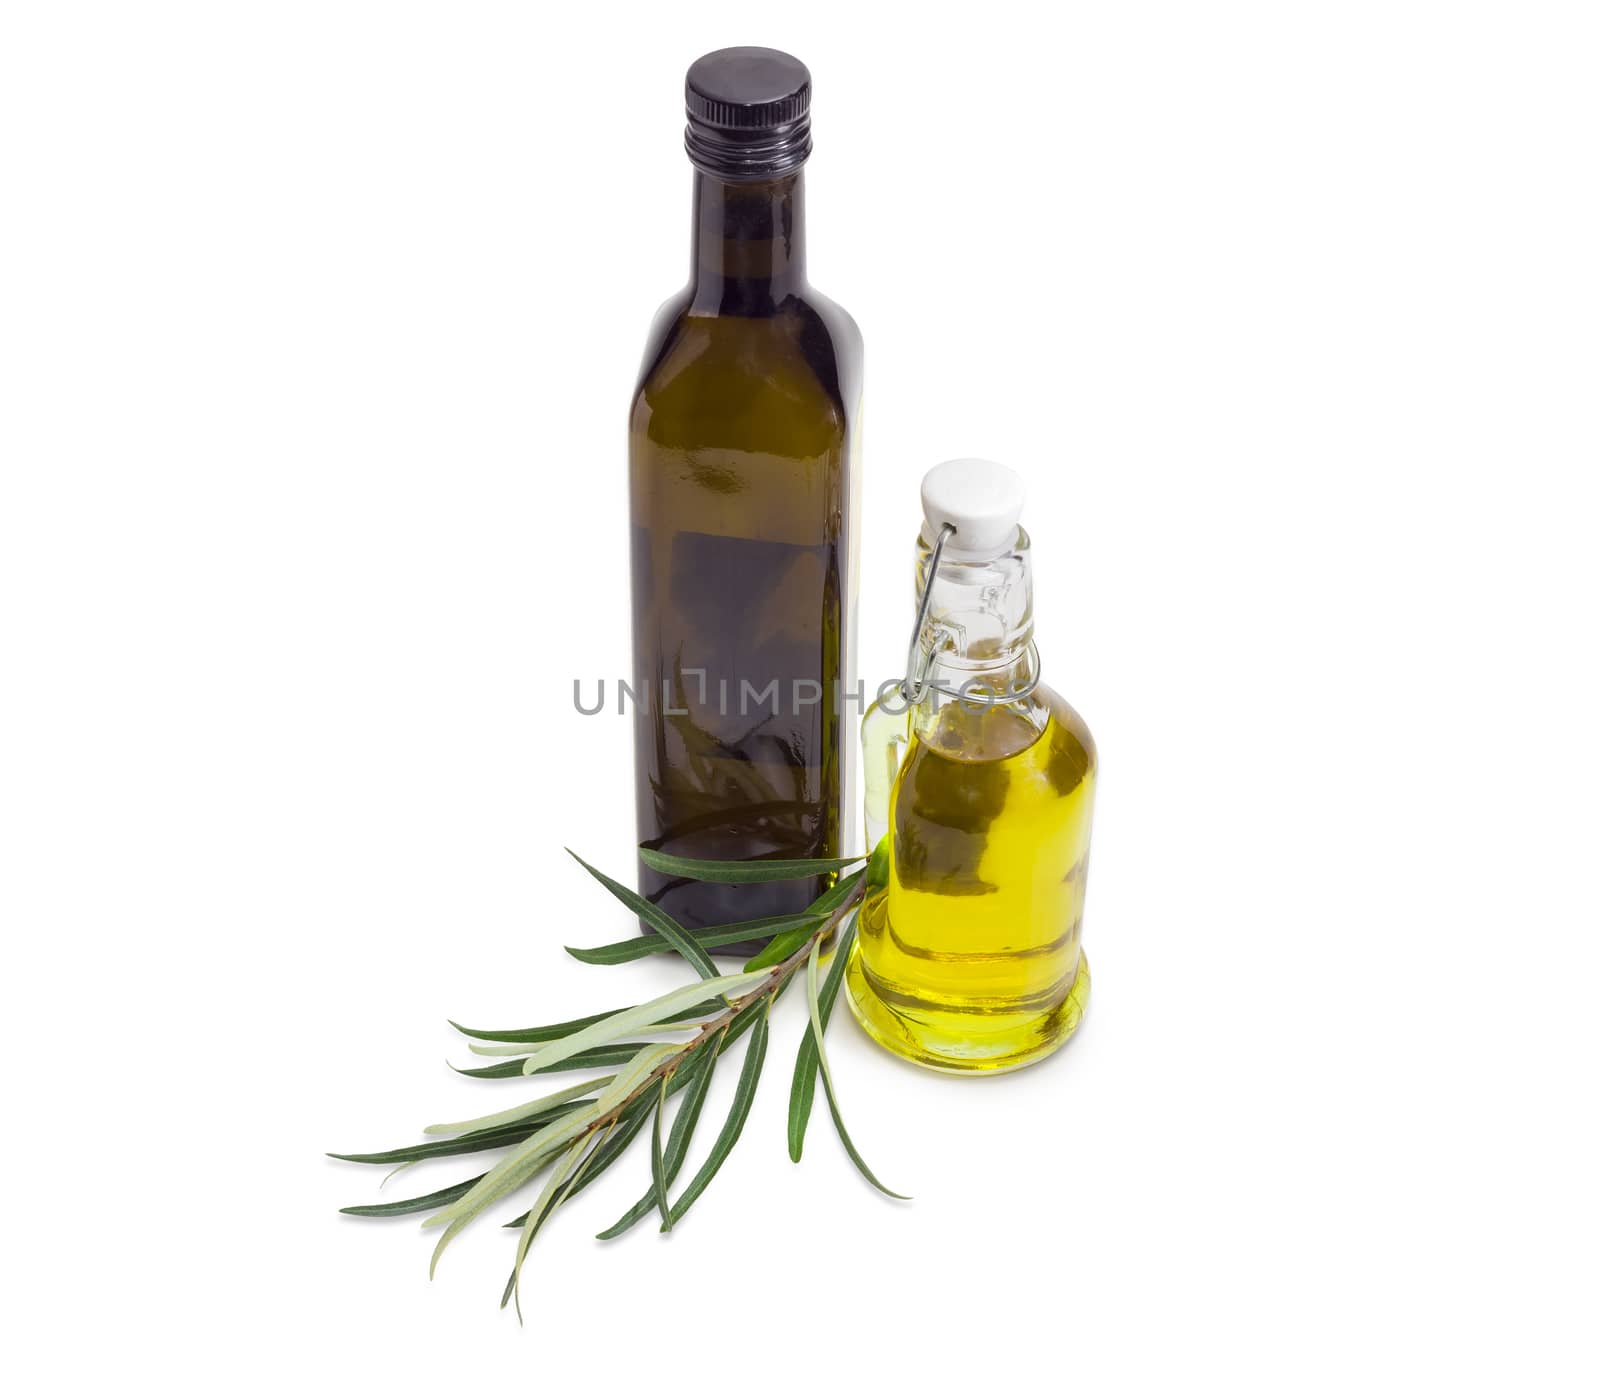 Two different glass bottles of the olive oil and olive branch beside on a white background
